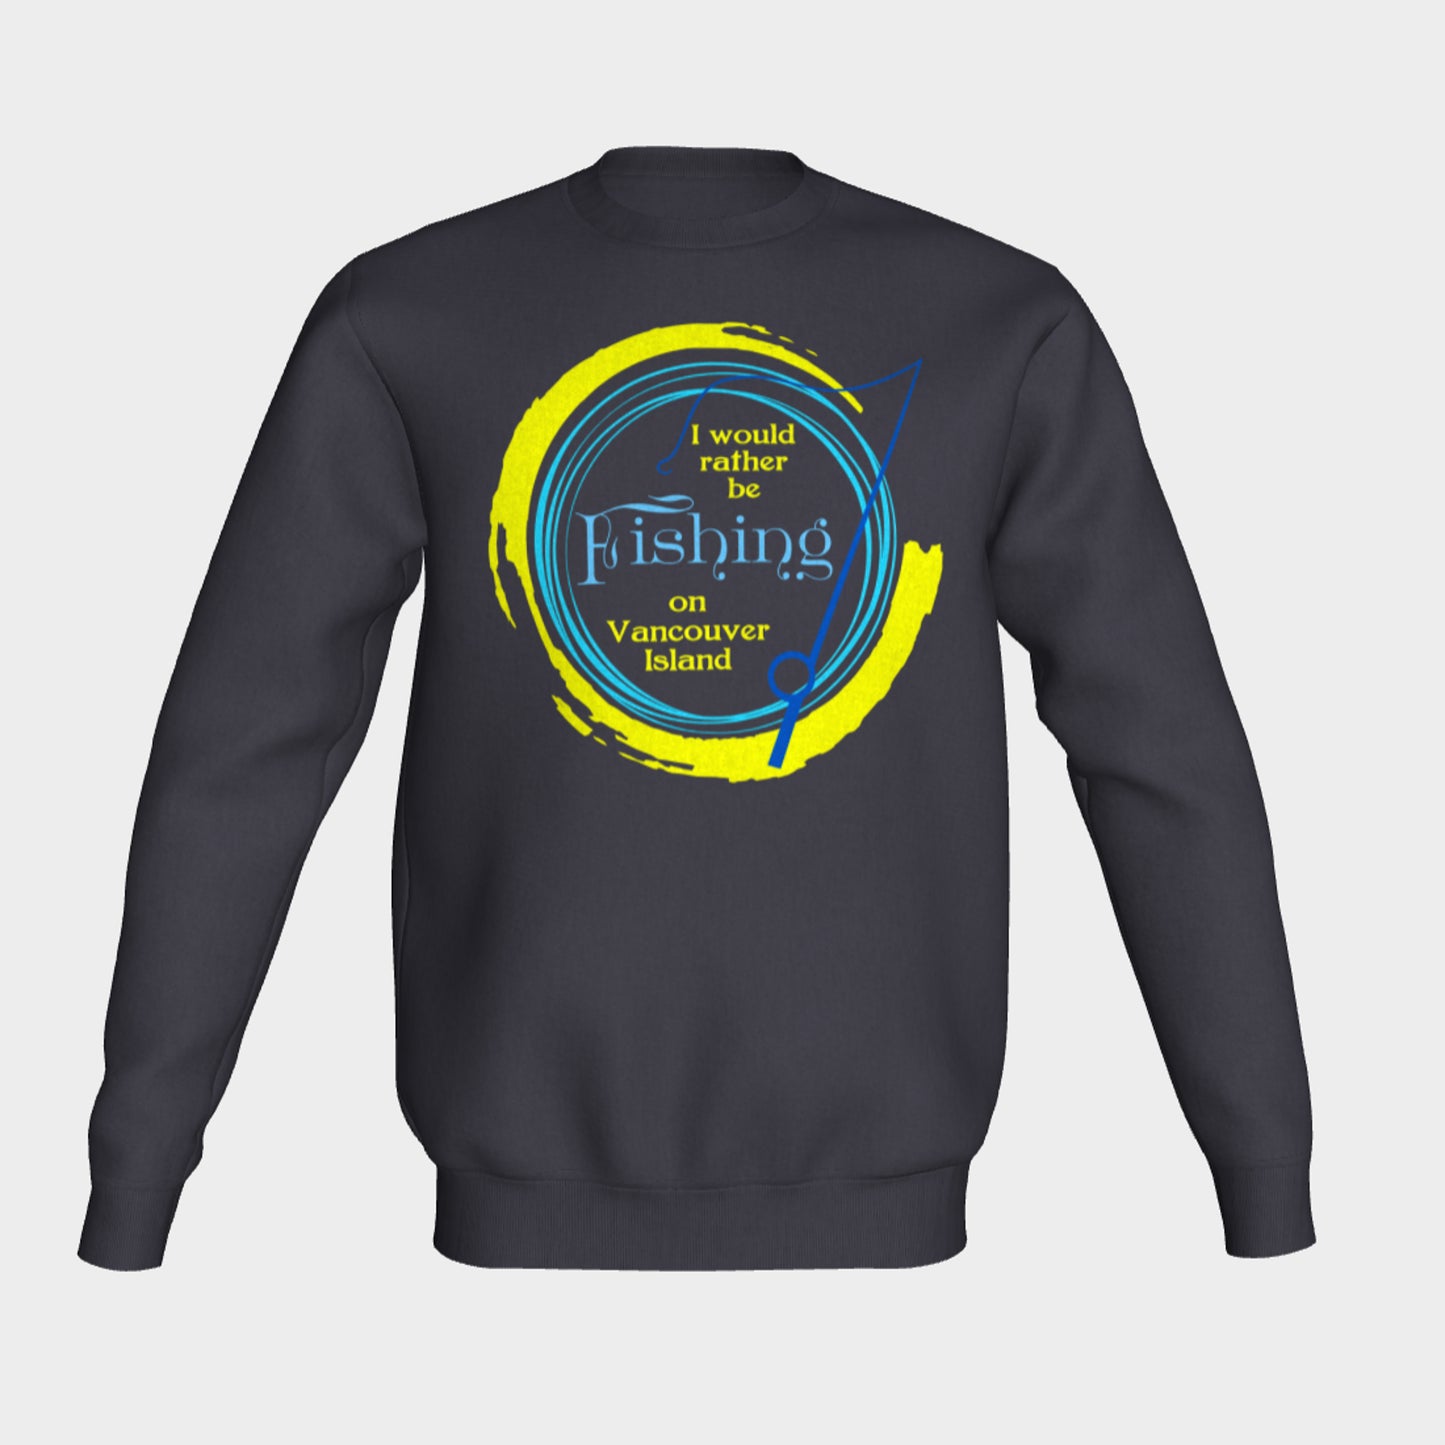 Rather Be Fishing (Yellow) Crewneck Sweatshirt What’s better than a super cozy sweatshirt? A super cozy sweatshirt from Van Isle Goddess!  Super cozy unisex sweatshirt for those chilly days.  Excellent for men or women.   Fit is roomy and comfortable. 